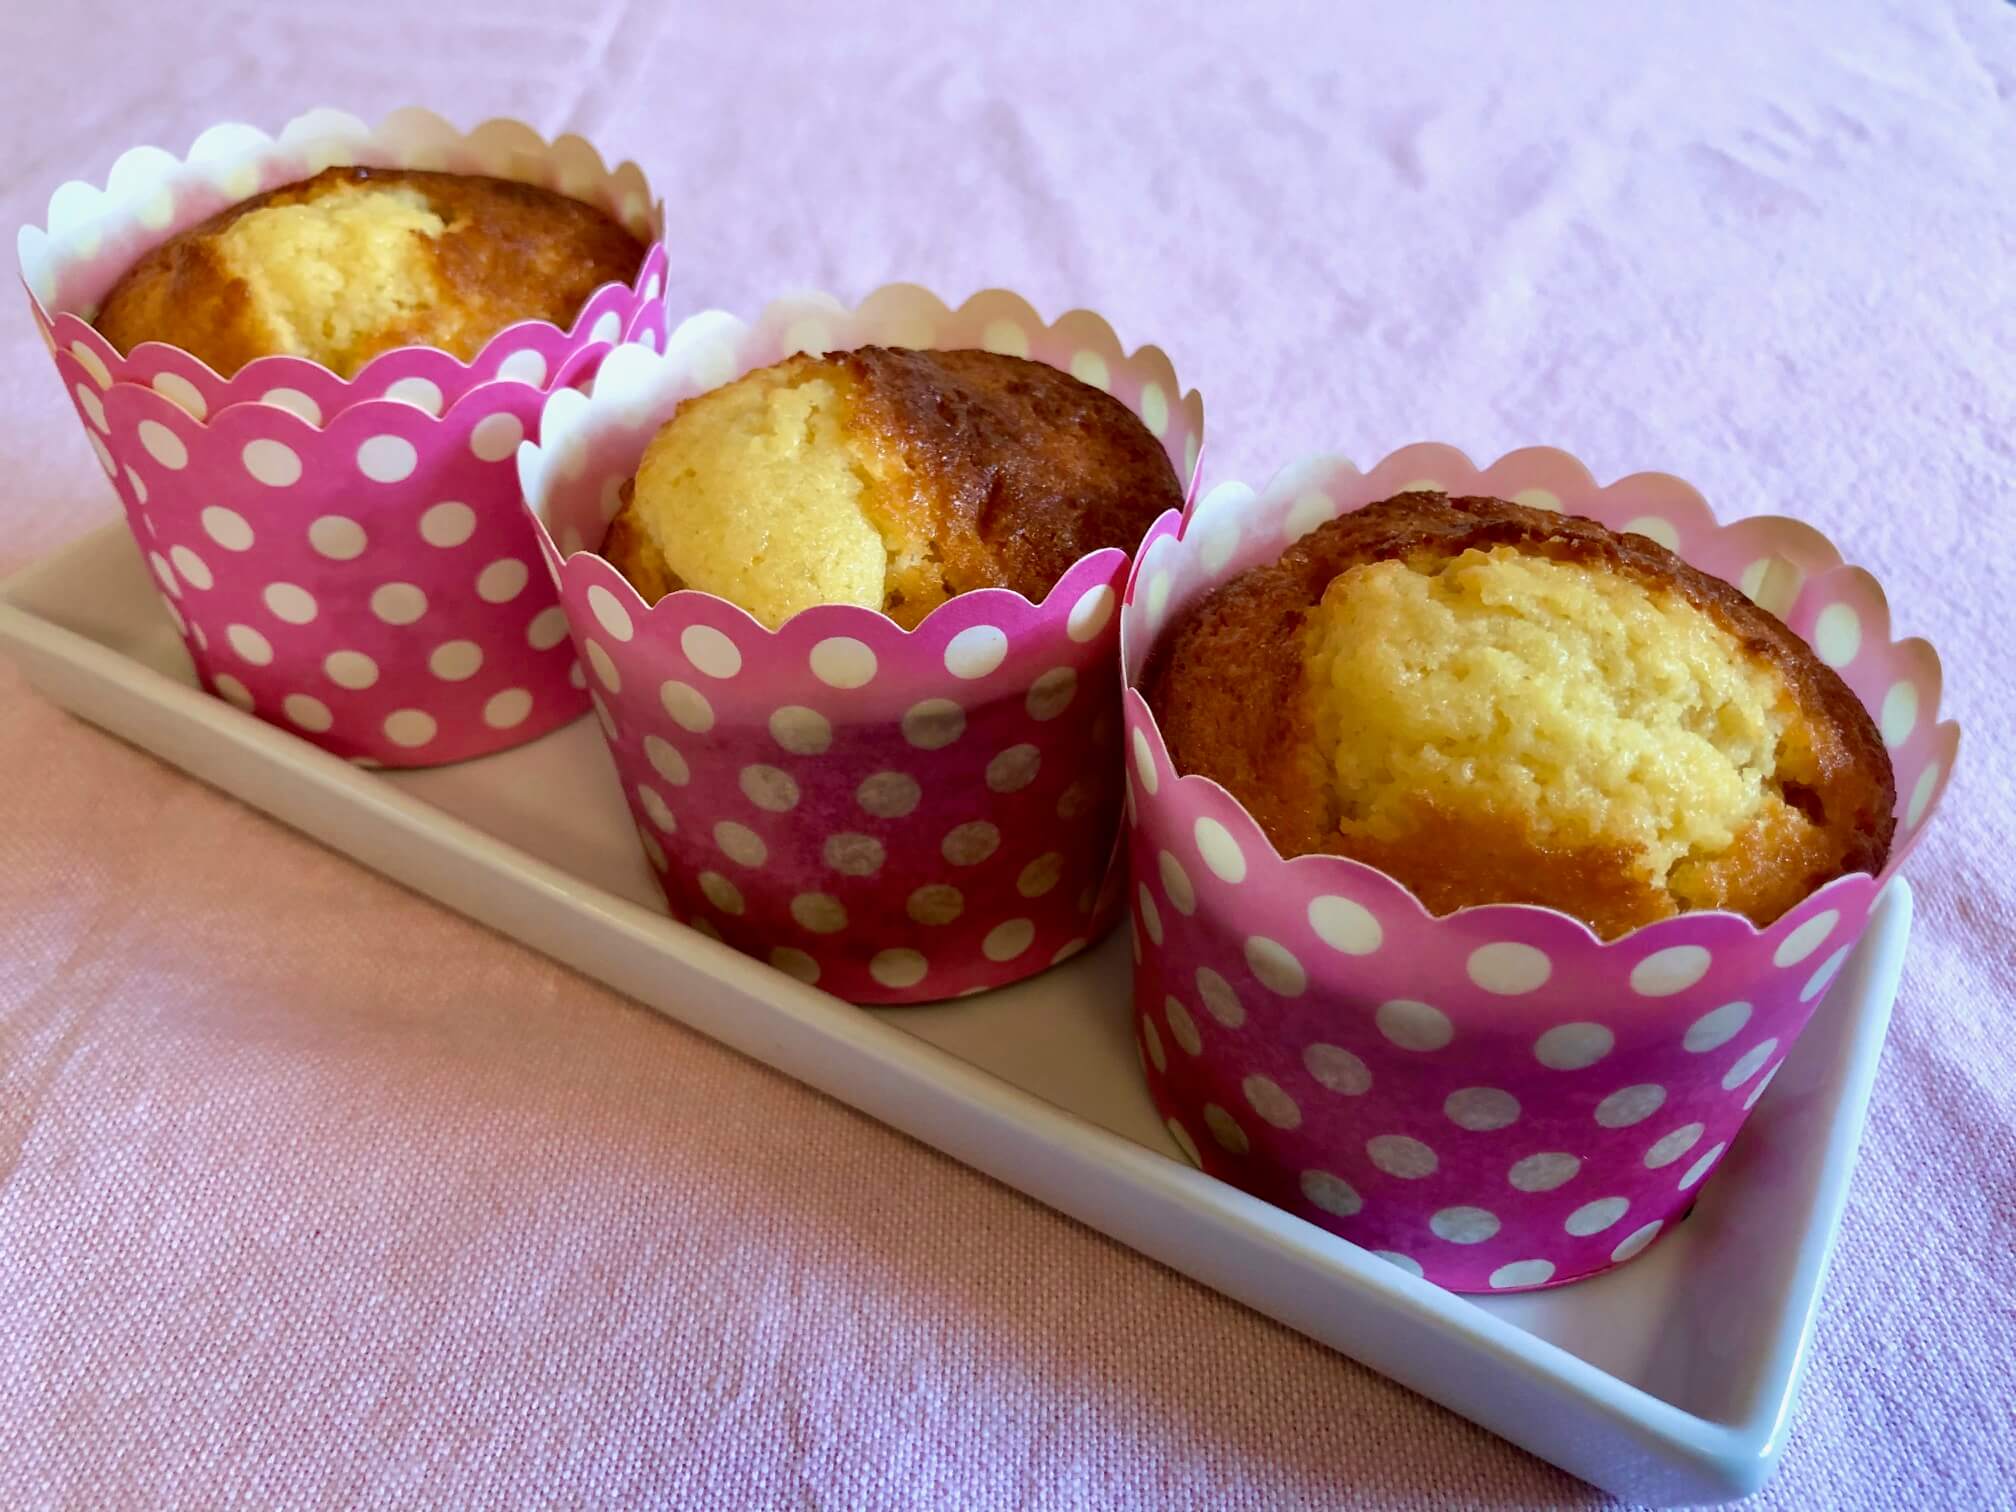 Cupcakes, muffins or madeleines?